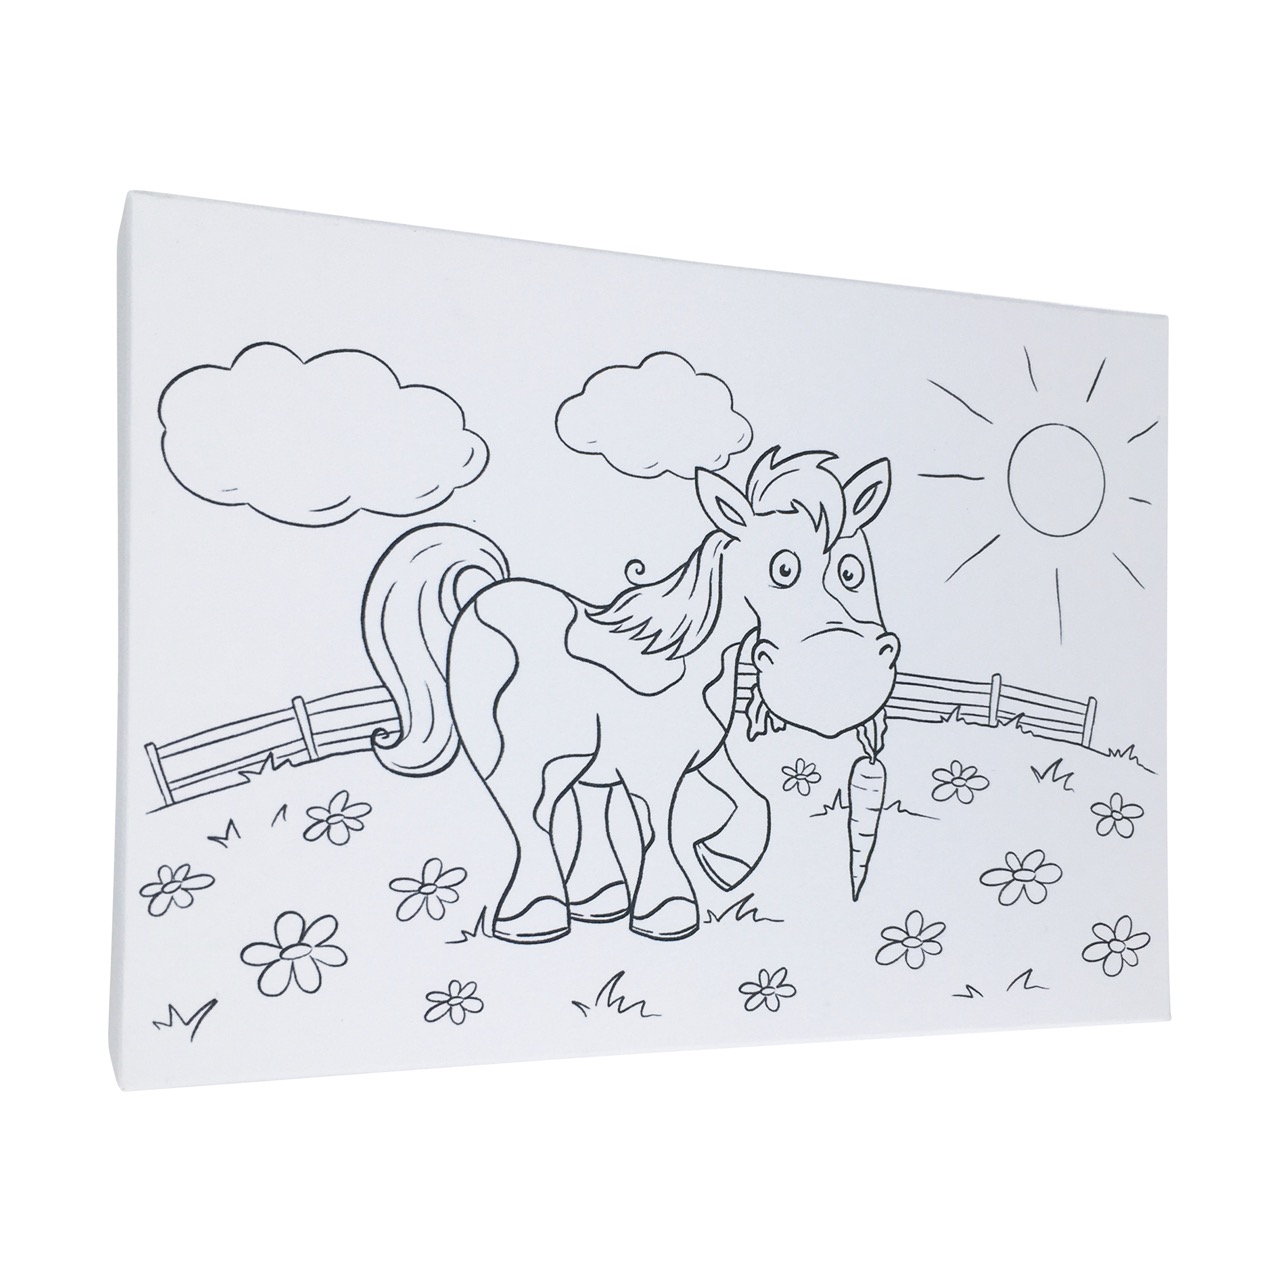 Buntbox Frame M cardboard canvas (21 cm x 14.8 cm) with horse on paddock for colouring